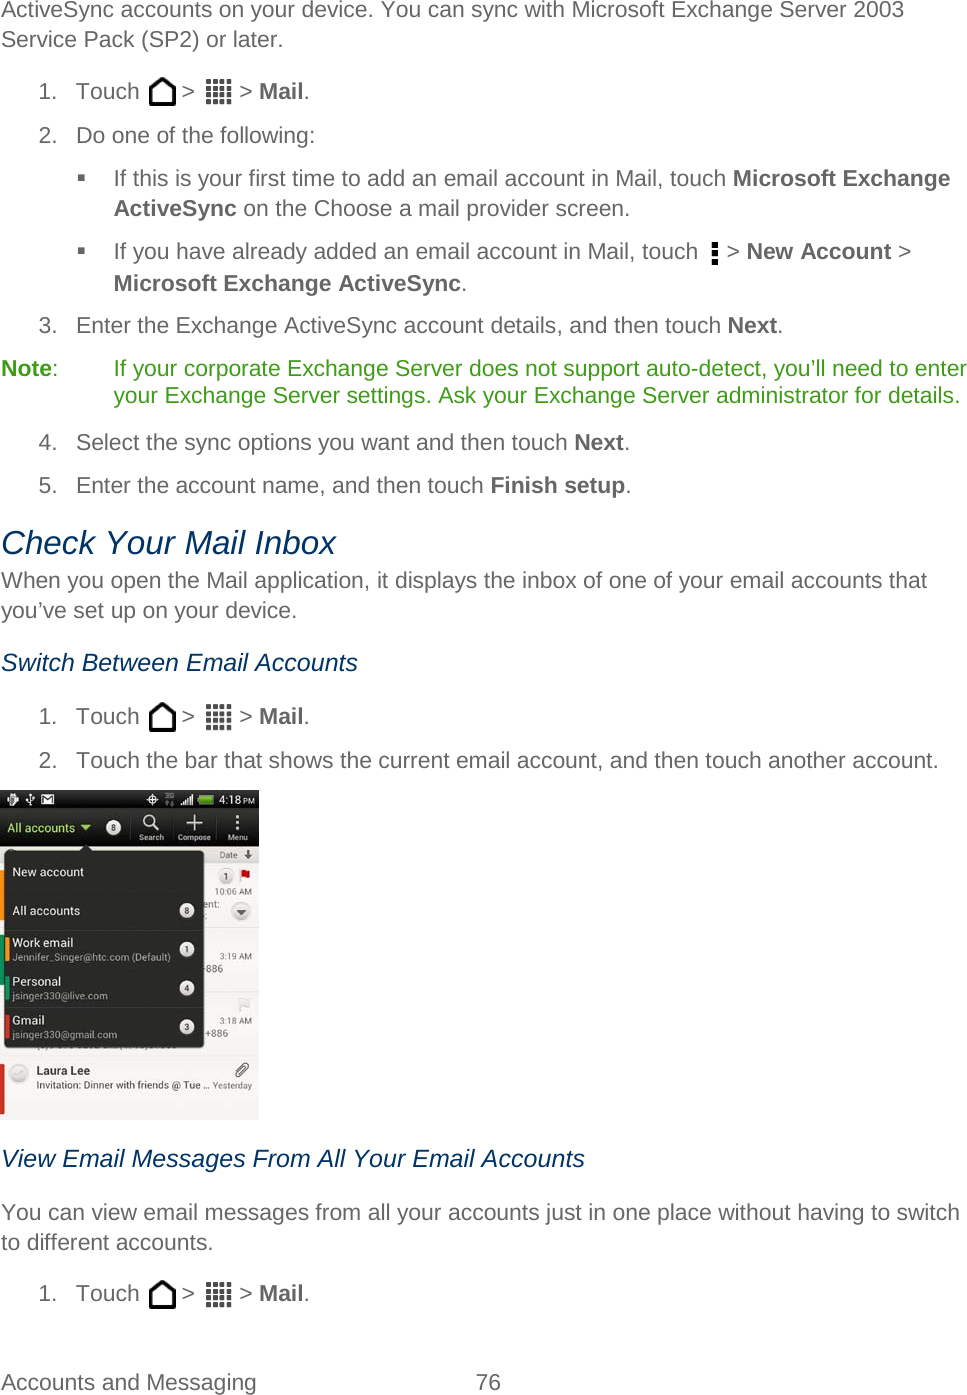  Accounts and Messaging 76   ActiveSync accounts on your device. You can sync with Microsoft Exchange Server 2003 Service Pack (SP2) or later. 1. Touch   &gt;   &gt; Mail. 2. Do one of the following:  If this is your first time to add an email account in Mail, touch Microsoft Exchange ActiveSync on the Choose a mail provider screen.  If you have already added an email account in Mail, touch   &gt; New Account &gt; Microsoft Exchange ActiveSync. 3. Enter the Exchange ActiveSync account details, and then touch Next.  Note:  If your corporate Exchange Server does not support auto-detect, you’ll need to enter your Exchange Server settings. Ask your Exchange Server administrator for details.  4. Select the sync options you want and then touch Next. 5. Enter the account name, and then touch Finish setup. Check Your Mail Inbox When you open the Mail application, it displays the inbox of one of your email accounts that you’ve set up on your device. Switch Between Email Accounts 1. Touch   &gt;   &gt; Mail. 2.  Touch the bar that shows the current email account, and then touch another account.  View Email Messages From All Your Email Accounts You can view email messages from all your accounts just in one place without having to switch to different accounts. 1. Touch   &gt;   &gt; Mail. 